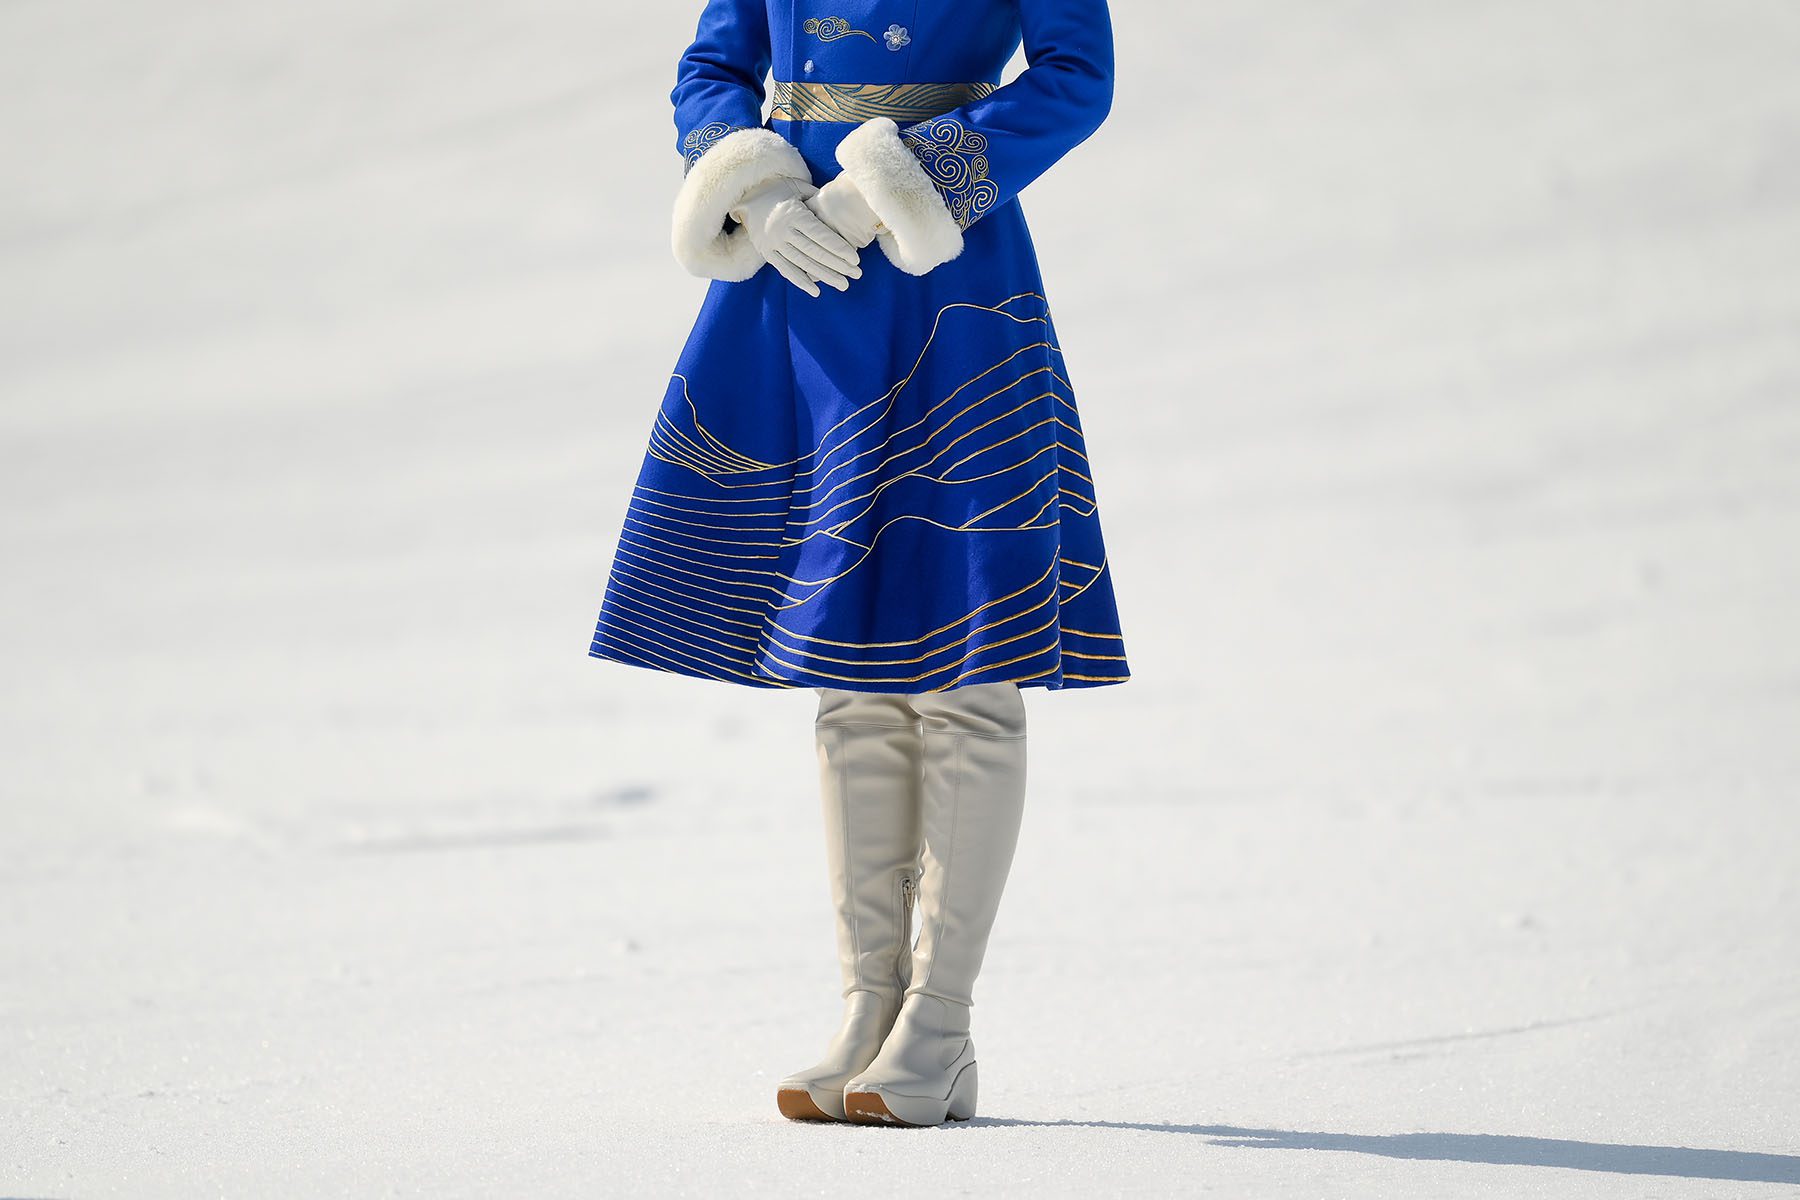 A hostess wearing a blue dress and white boots stands during a ceremony.